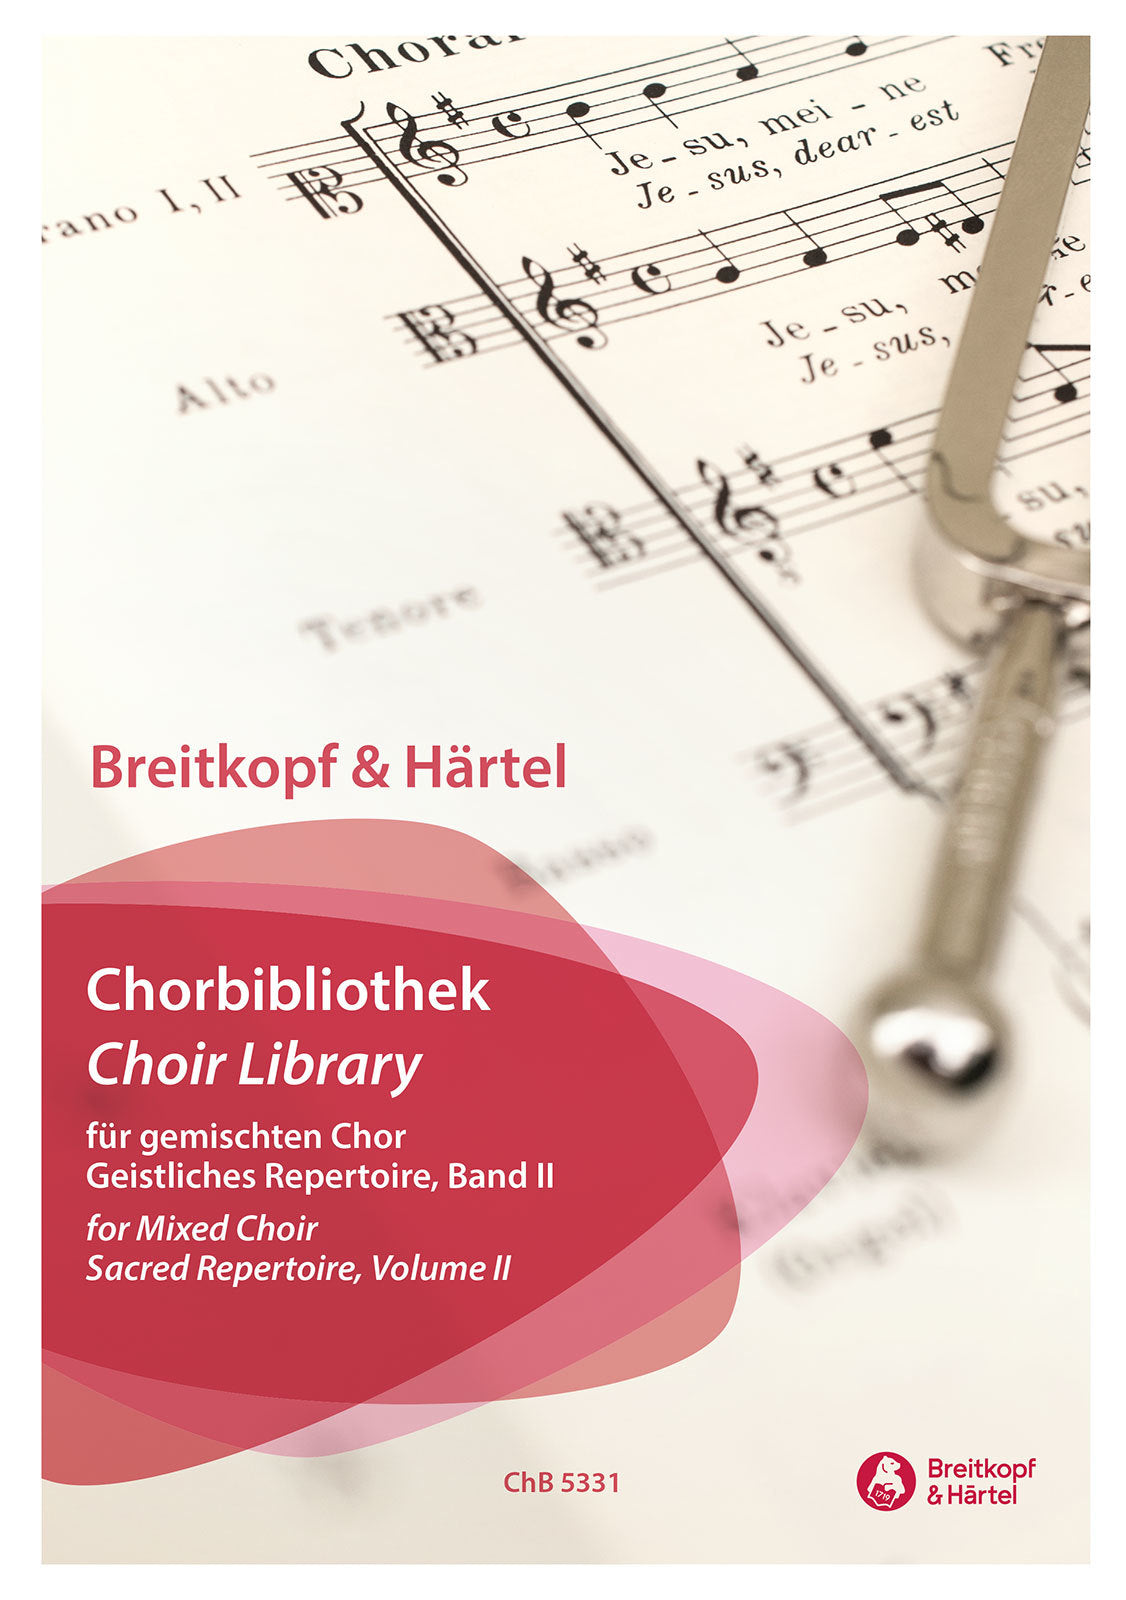 Choir Library for Mixed Choir - Sacred Repertoire Volume 2 (Holy Week to Pentecost)